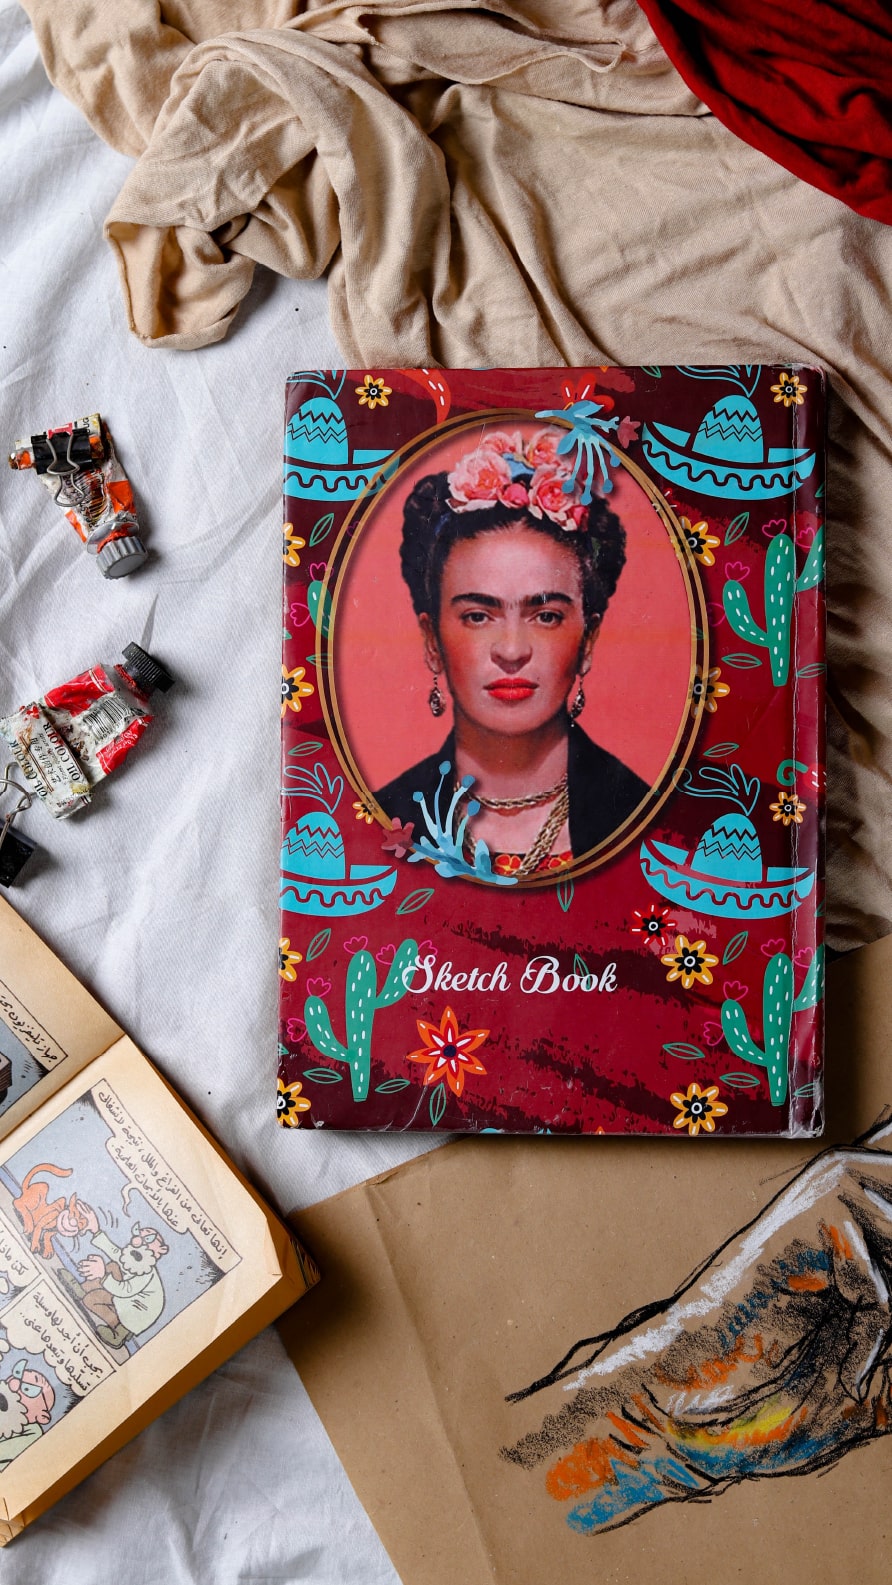 iPhone wallpapers featuring Frida Kahlo